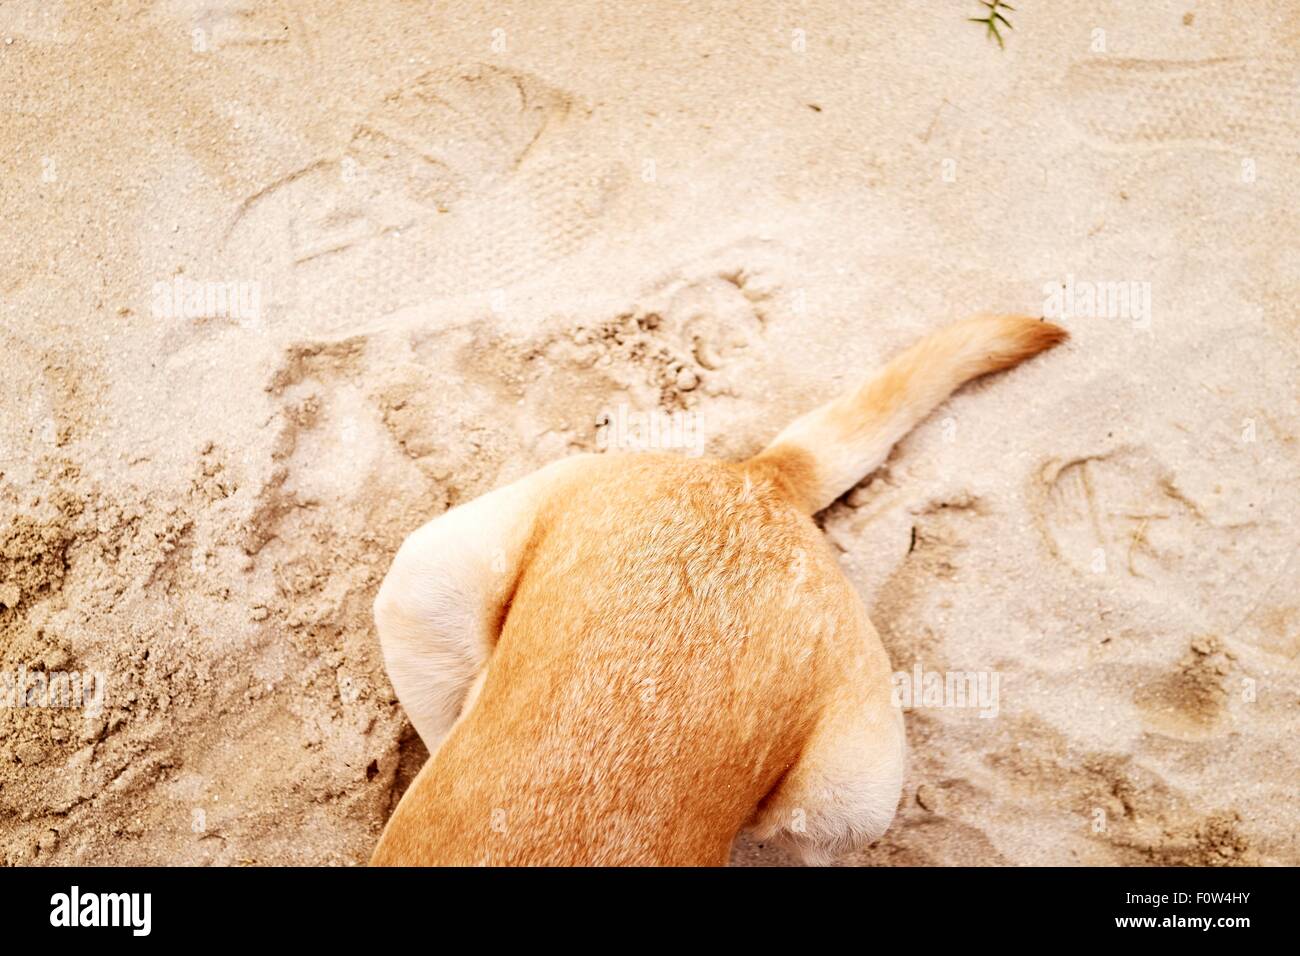 Partially obscured dog on sand Stock Photo